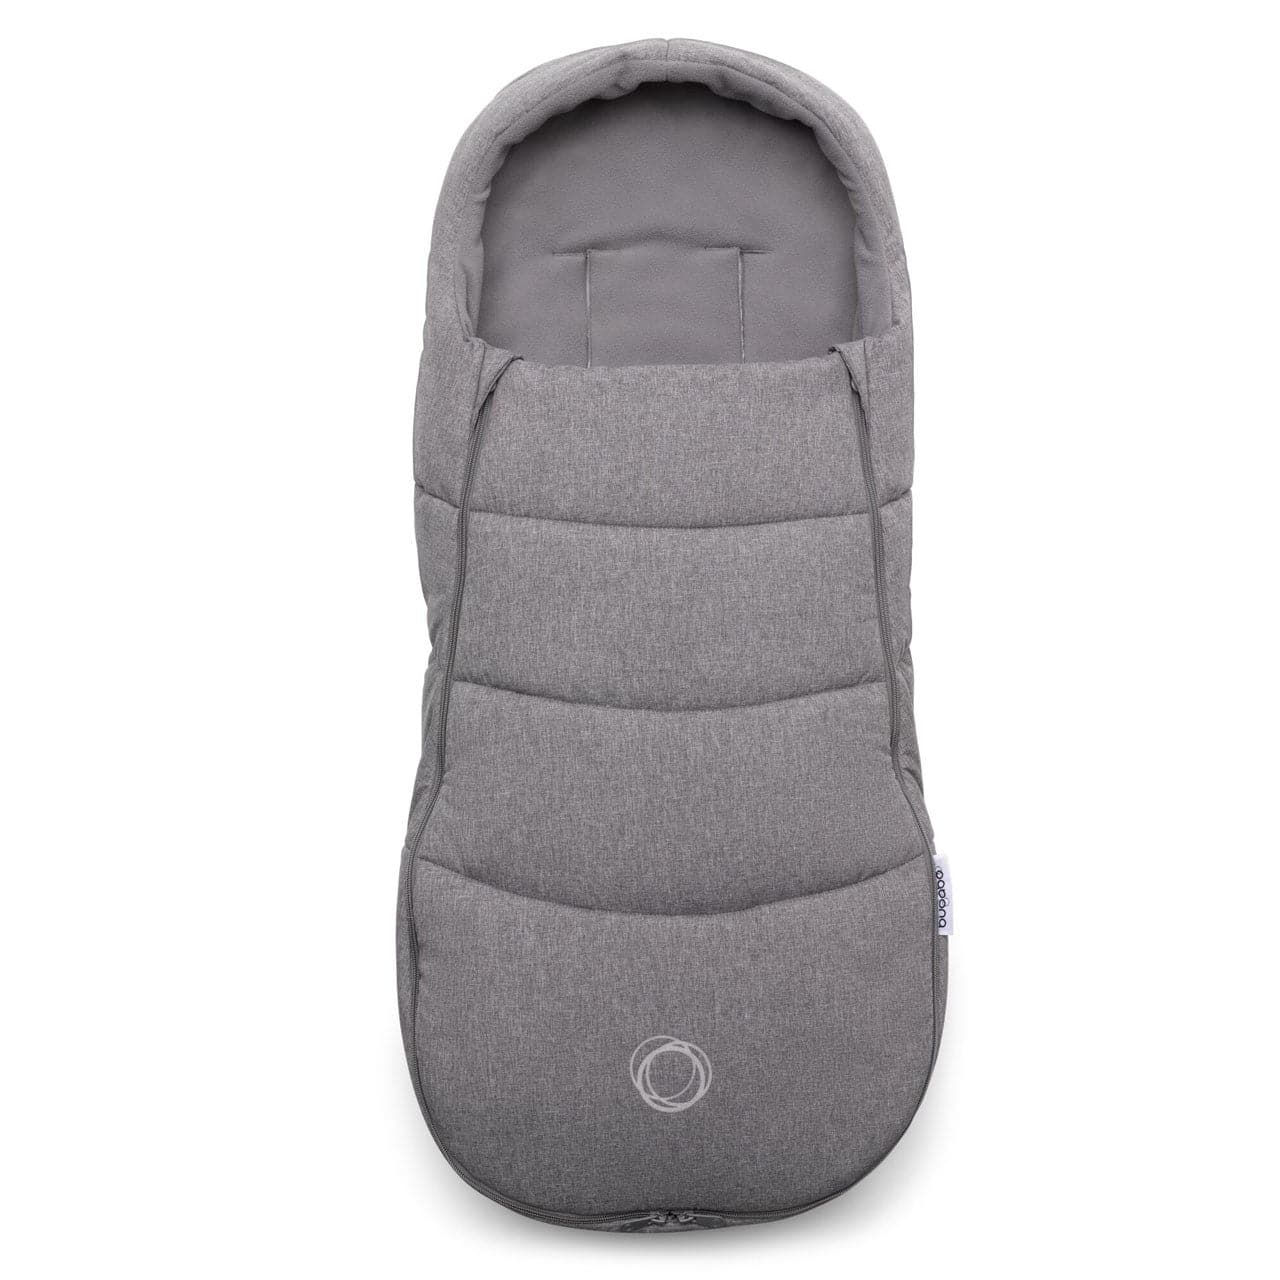 Bugaboo Footmuff - Grey Melange - For Your Little One